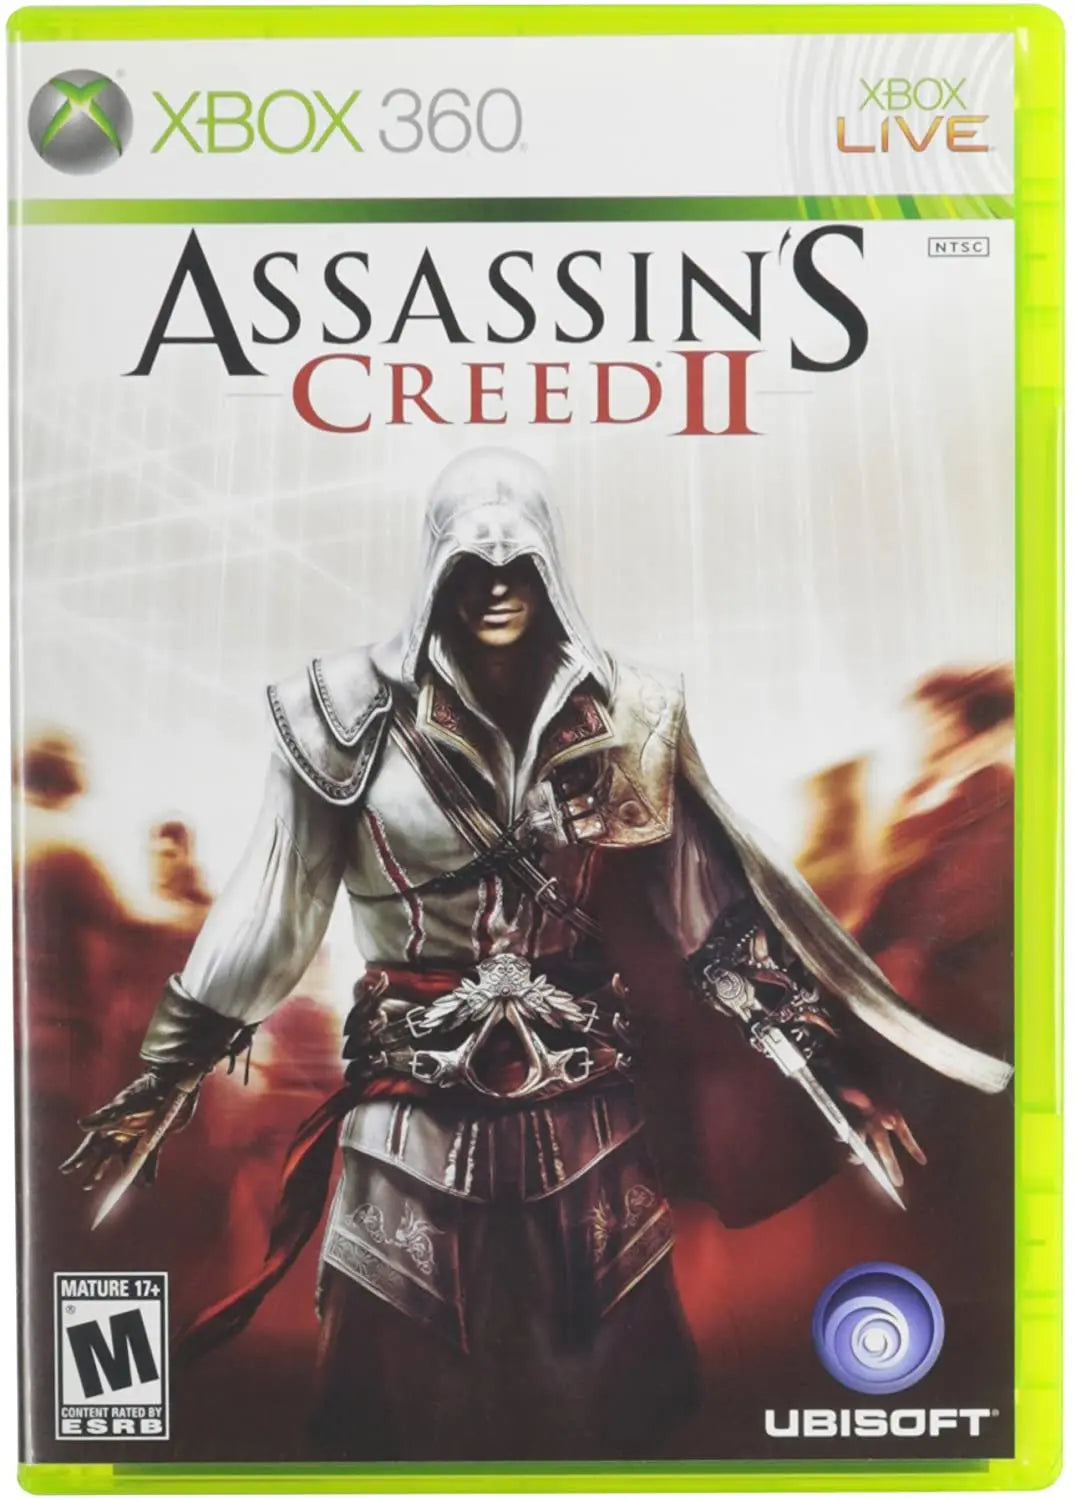 Assassin's Creed II - Xbox 360 - Used King Gaming